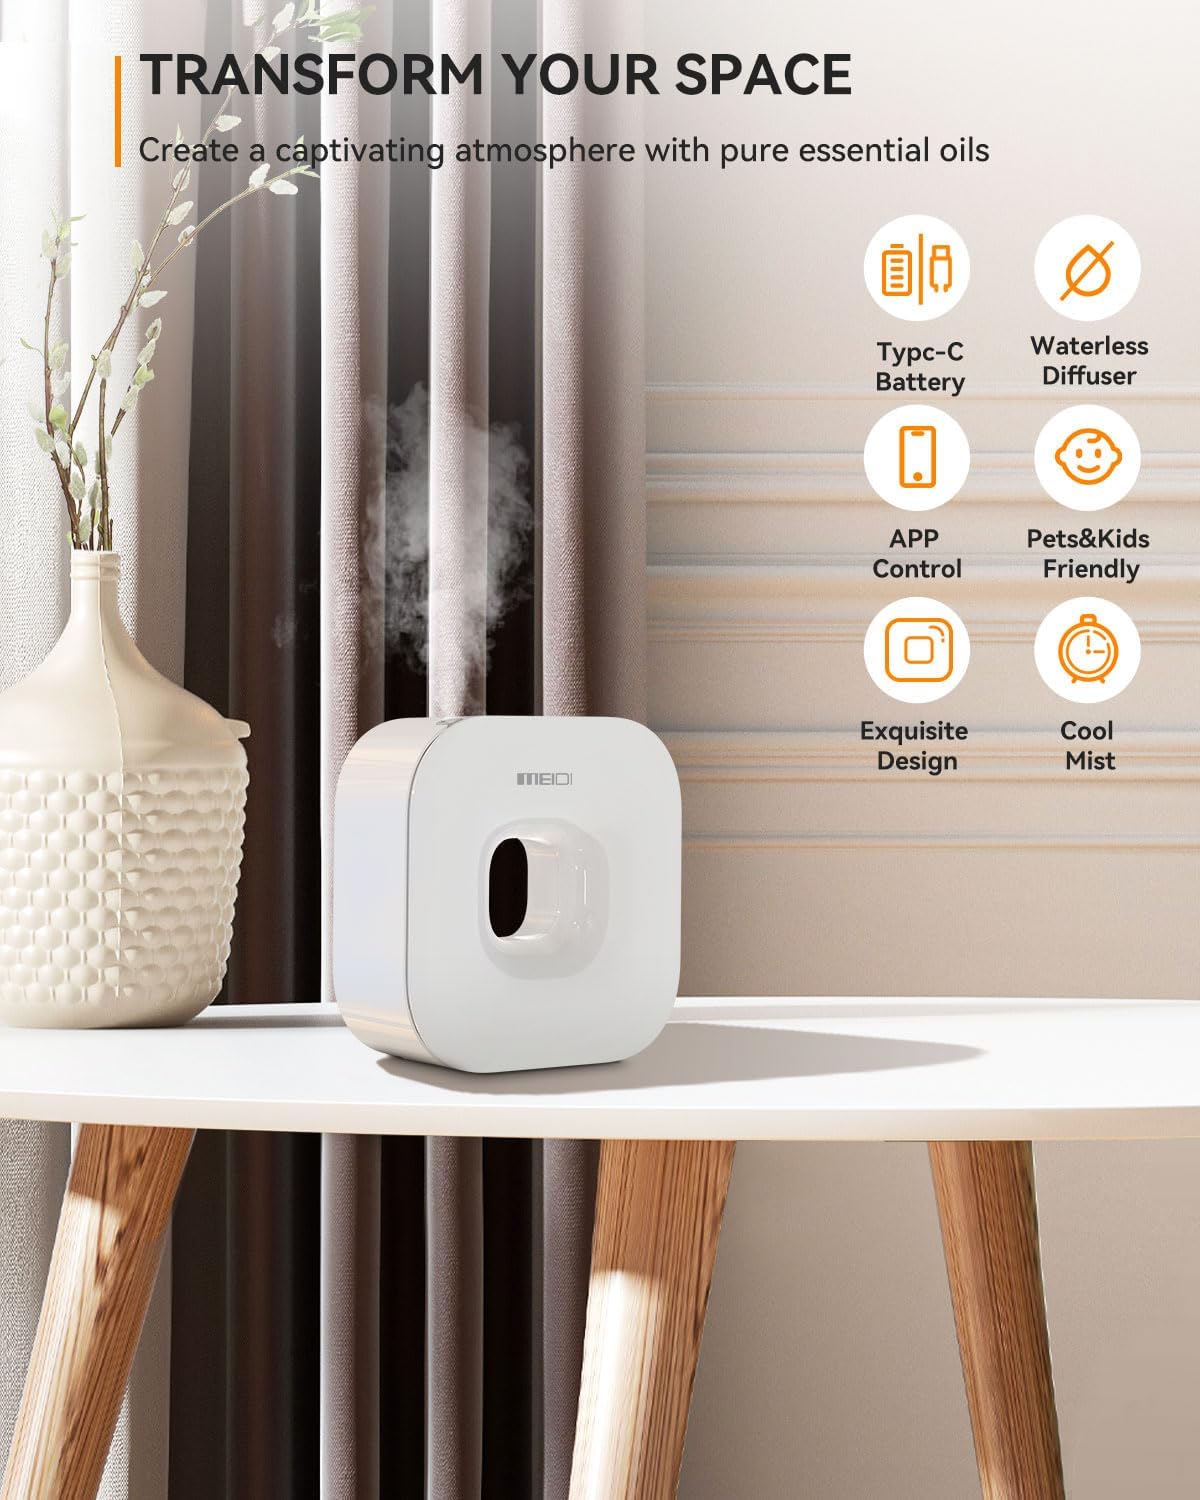 MEIDI Waterless Essential Oil Diffuser - Bluetooth Cordless Aromatherapy Diffuser with App Control, Smart Timer Setting, Hang-up Design and Wide Coverage for Home, Office, Hotel and SPA (White) (W